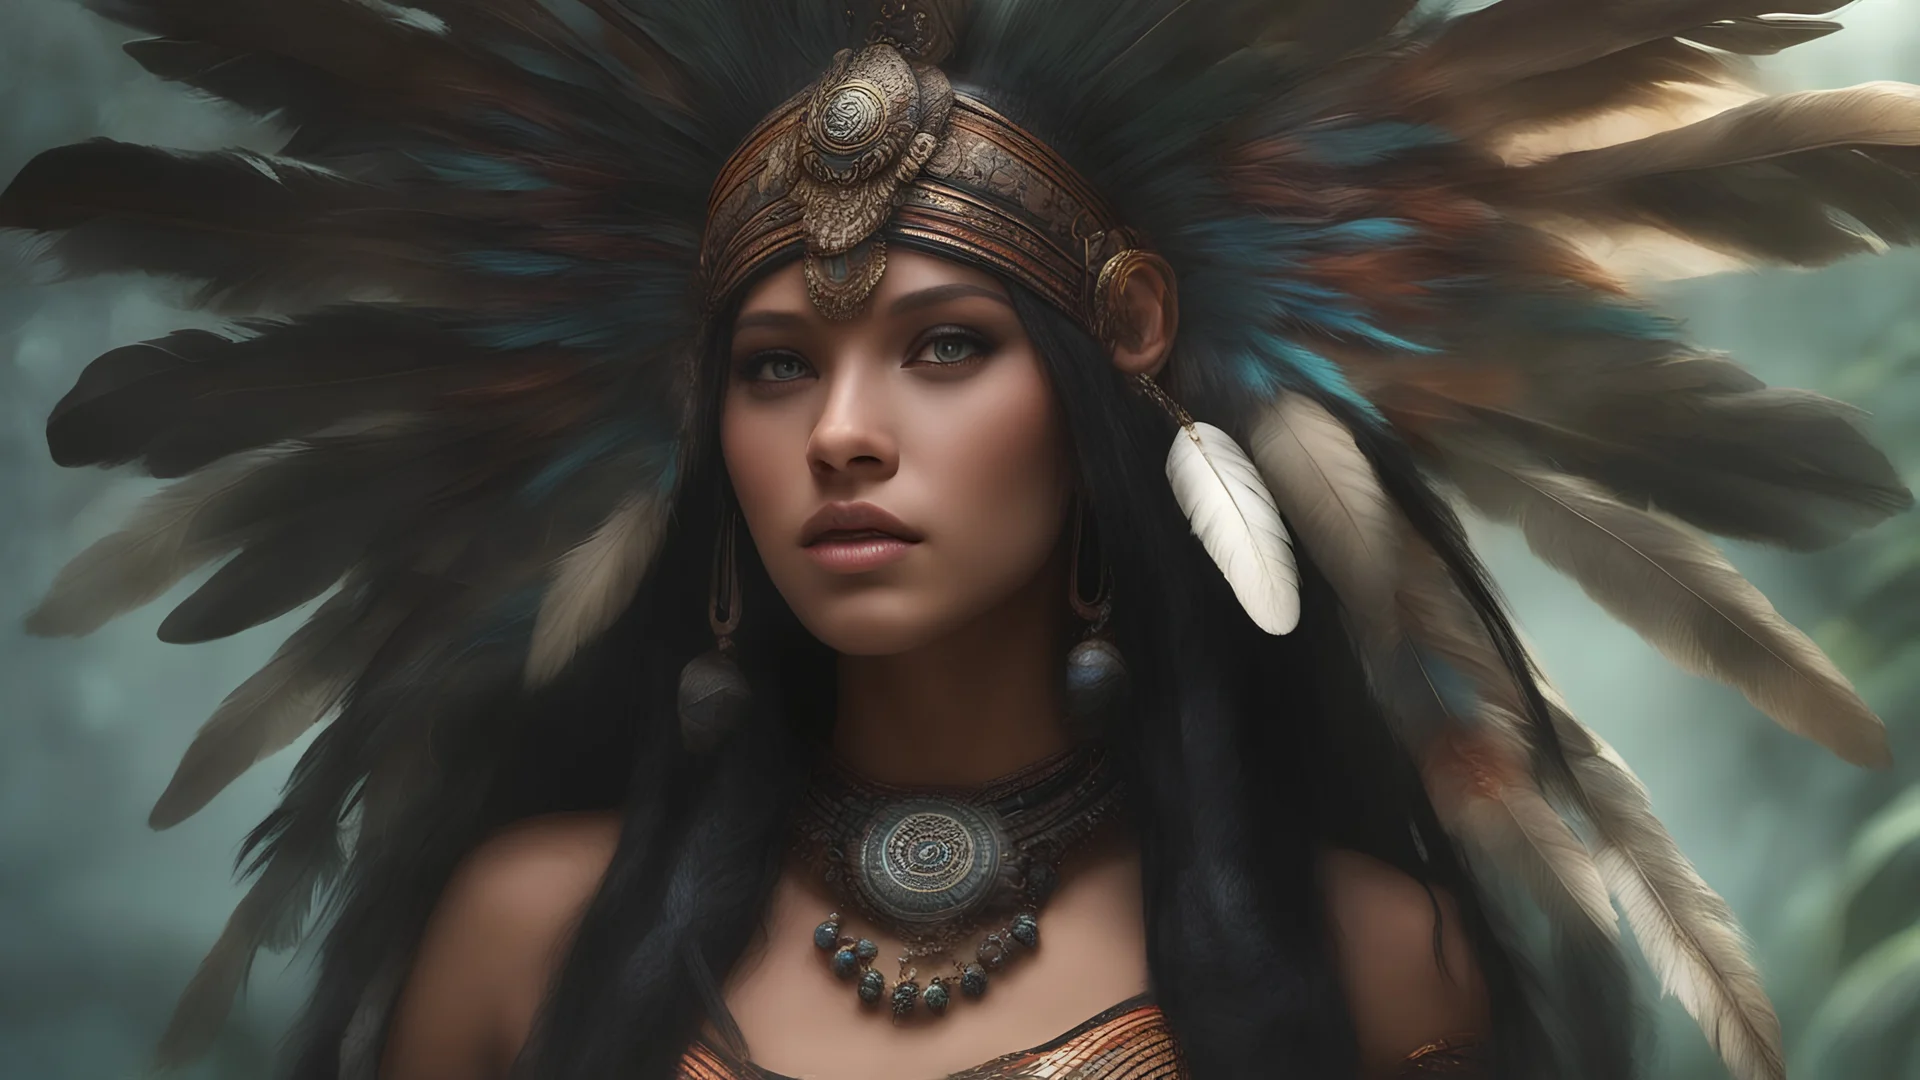 Photoreal unearthly gorgeous indigenous godlike mayan girl with neon glowing eyes adorned in clothes adorned with feathers that flutter with every step exuding beauty that blends seamlessly with the natural surroundings and hair cascading down her back like a waterfall of obsidian and eyes holding a spark of wild intelligence in a dense rainforest, otherworldly creature, in the style of fantasy movies, shot on Hasselblad h6d-400c, zeiss prime lens, bokeh like f/0.8, tilt-shift lens